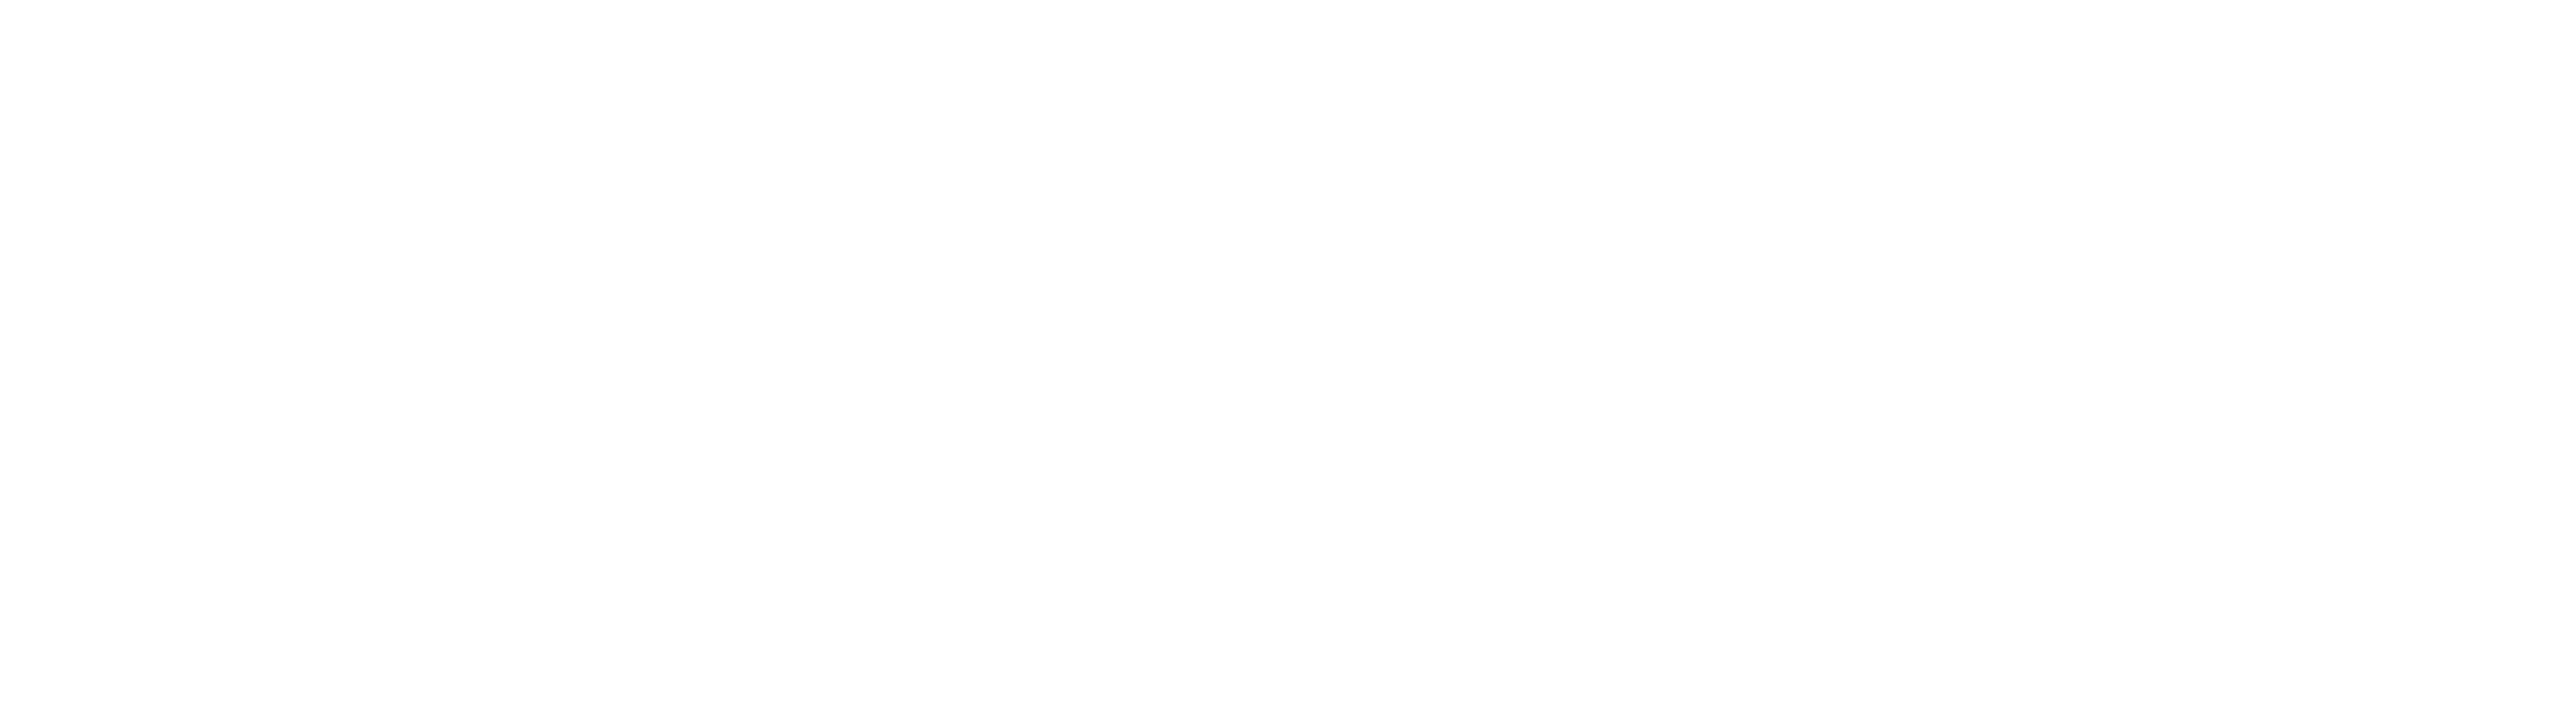 The Safety and Security Event Series